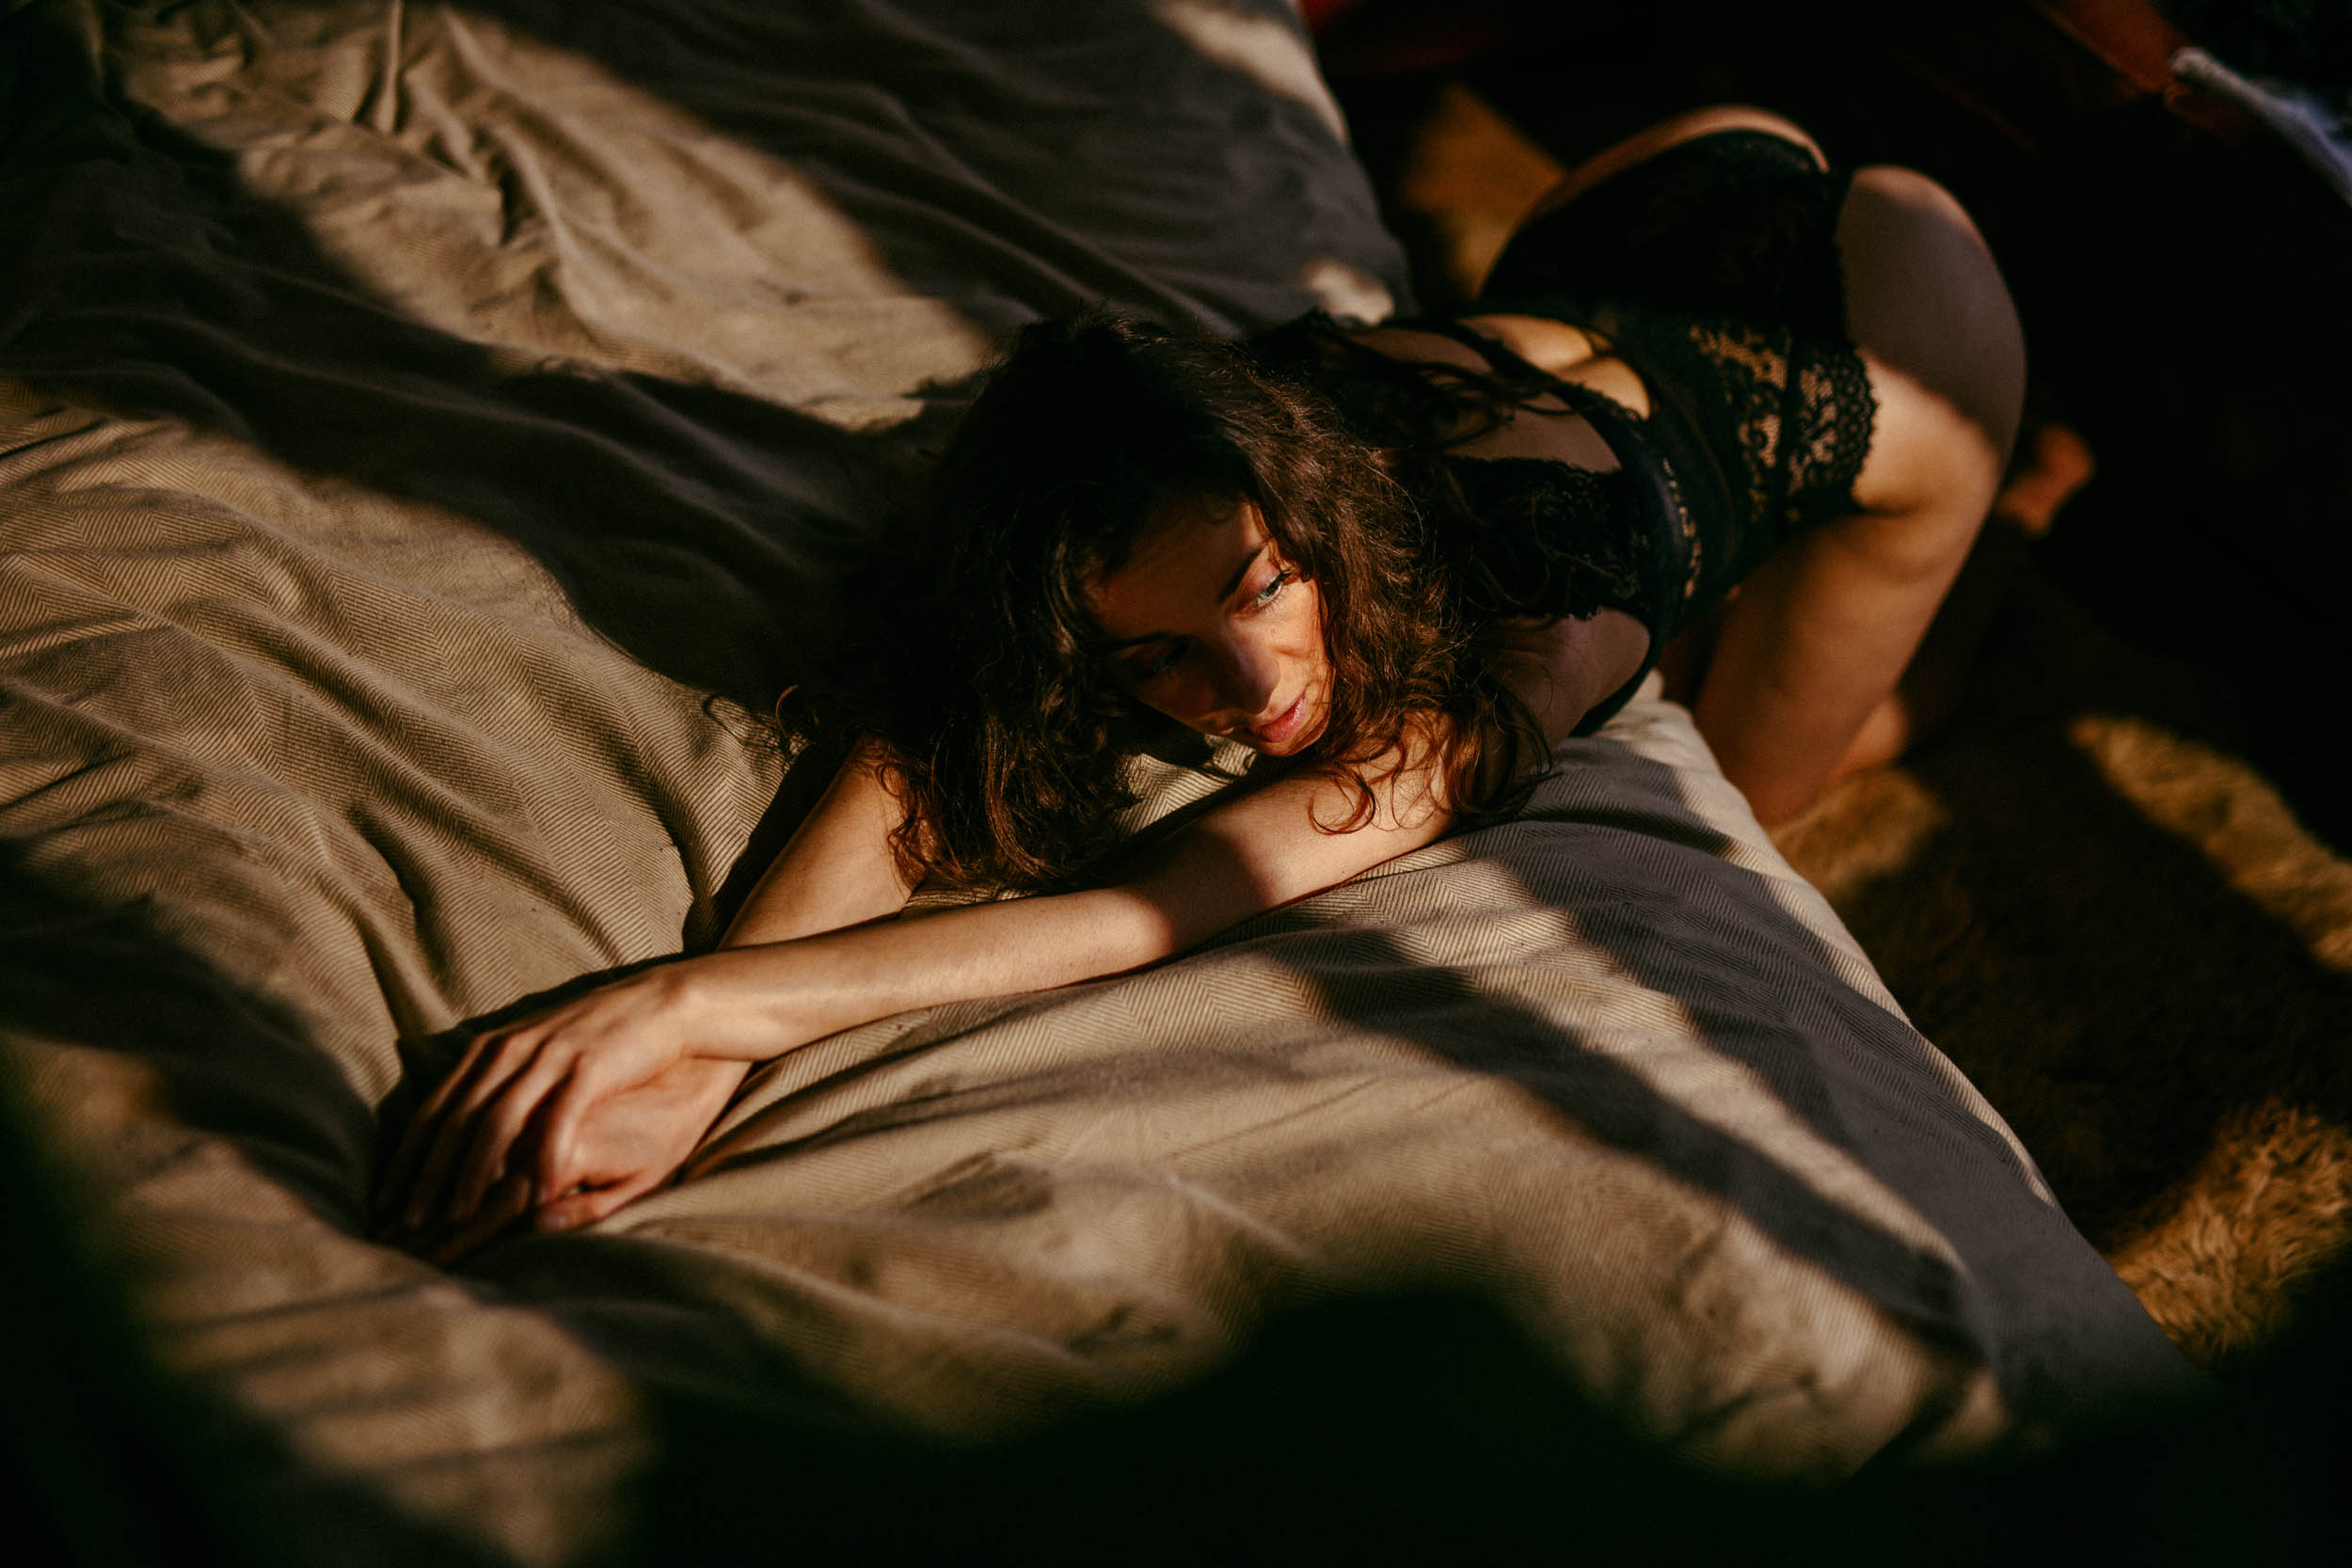 A woman lying on the bed in lingerie.